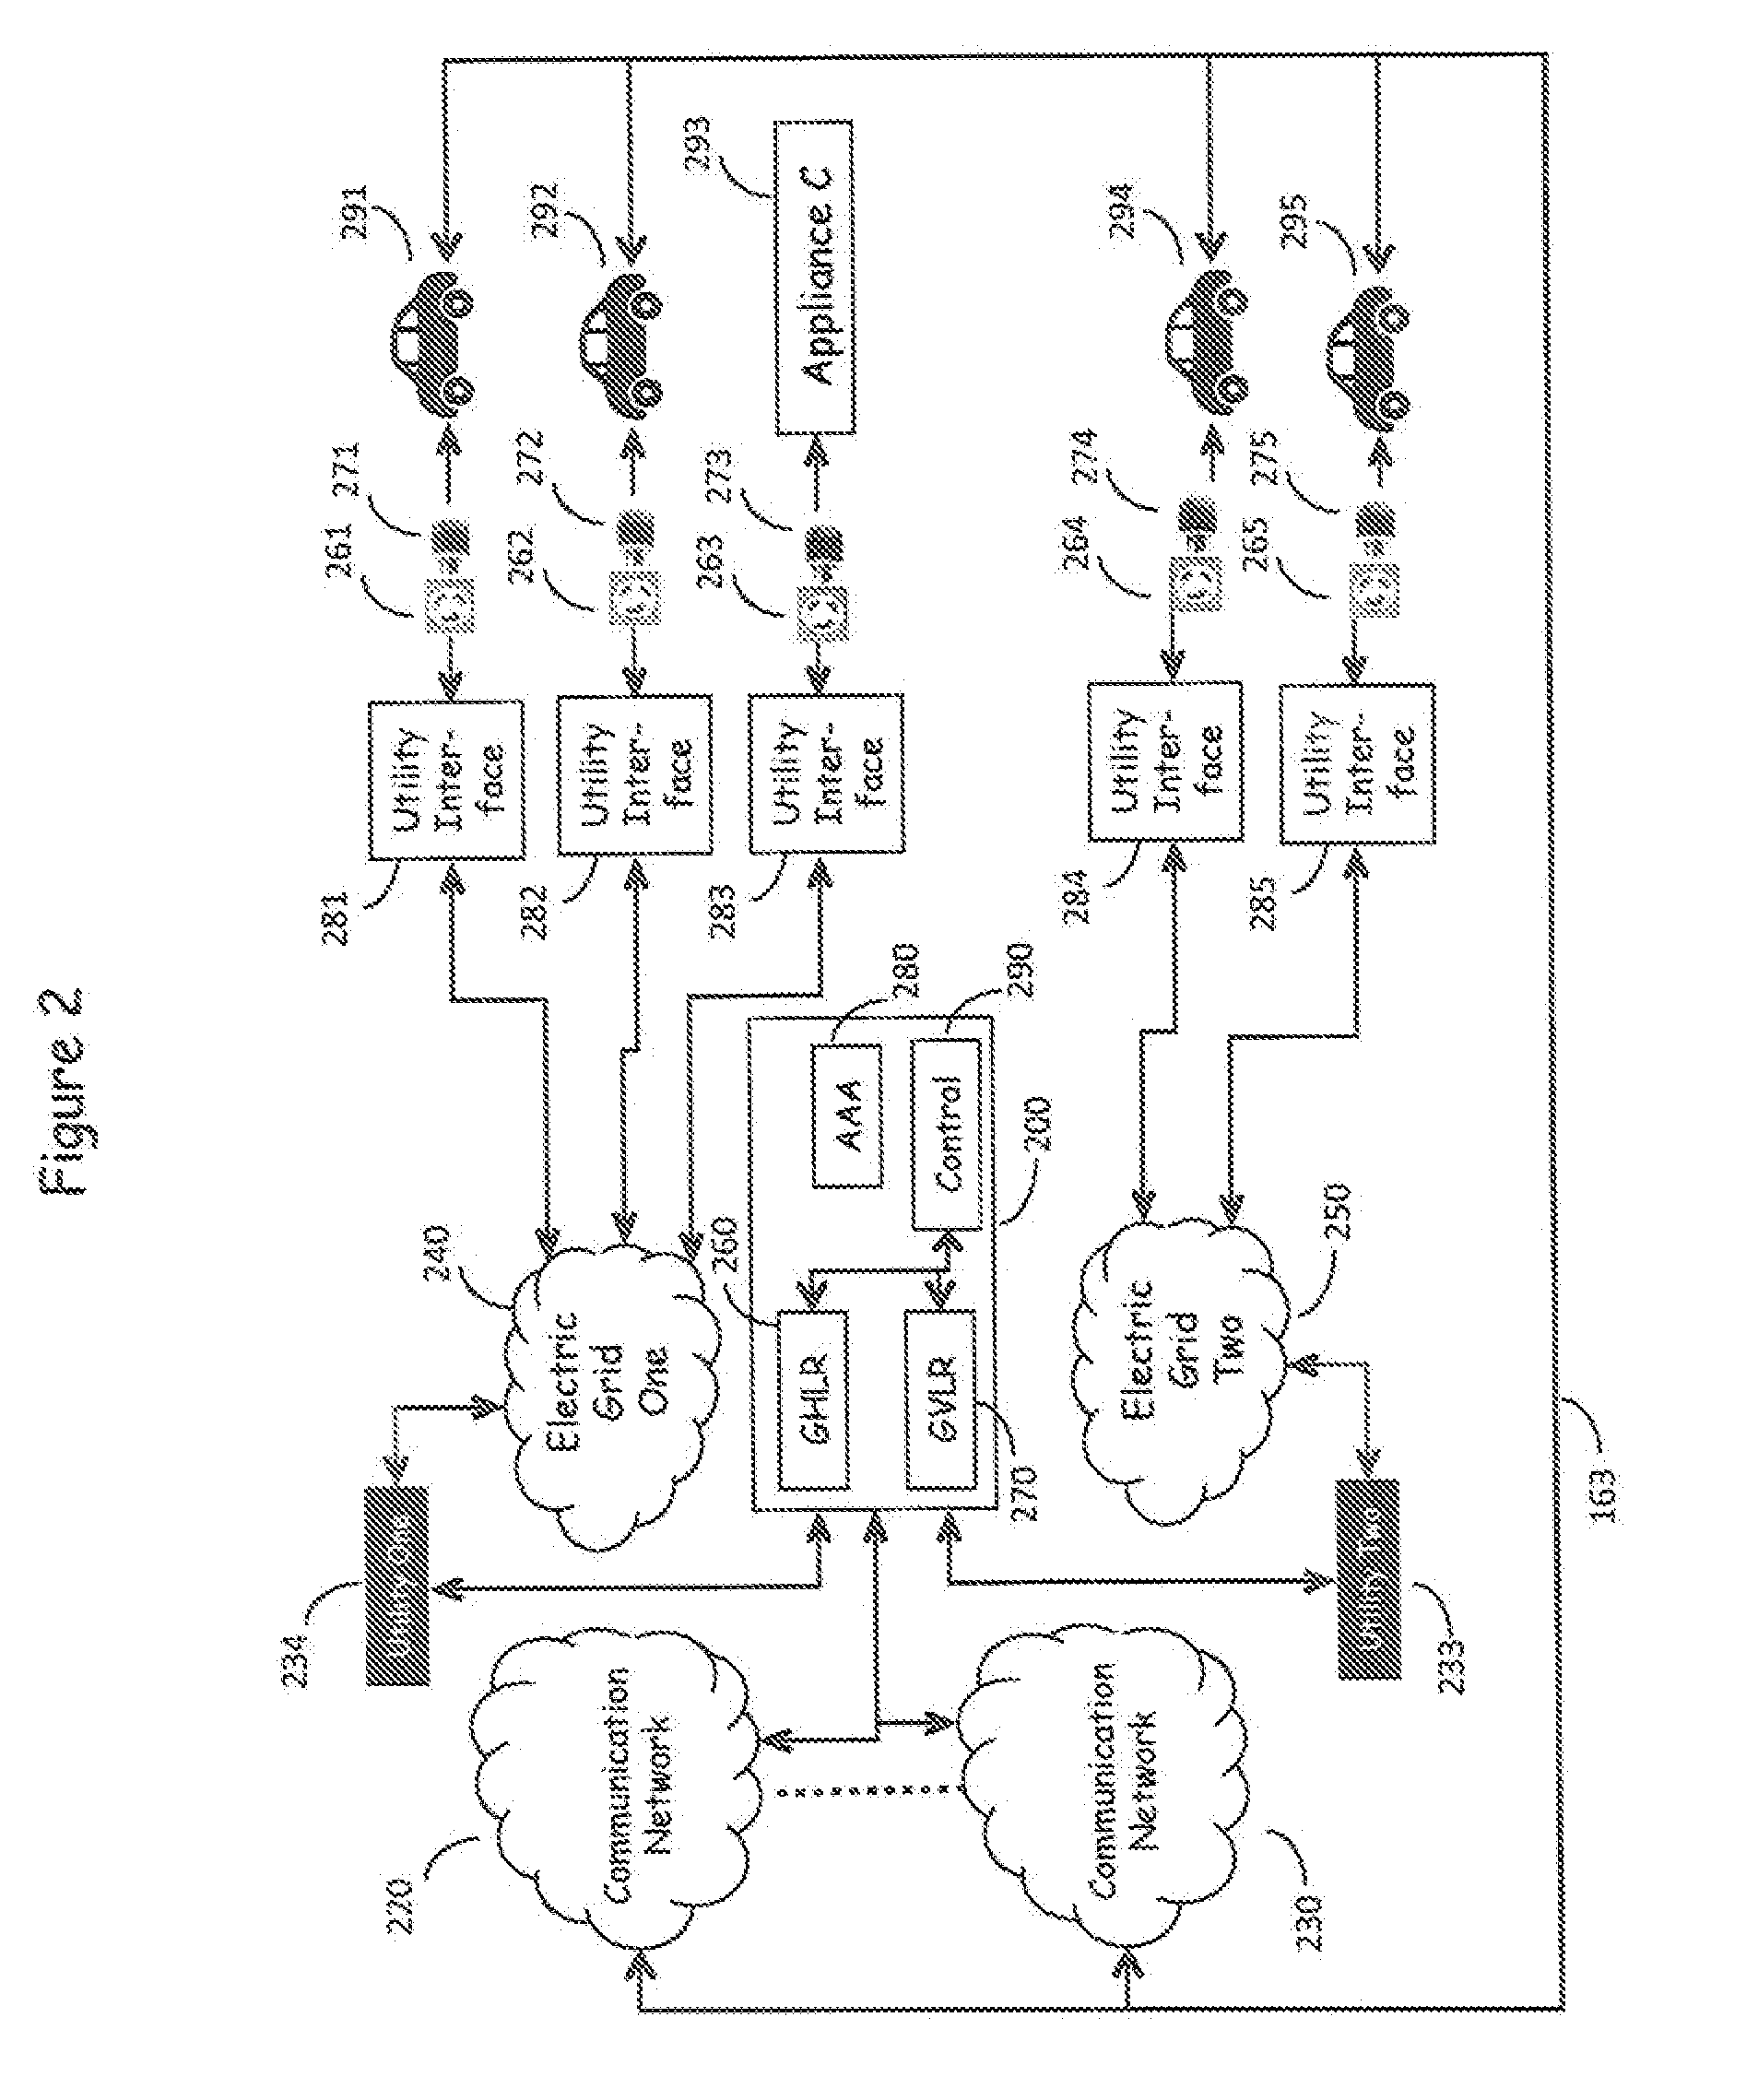 Network for authentication, authorization, and accounting of recharging processes for vehicles equipped with electrically powered propulsion systems